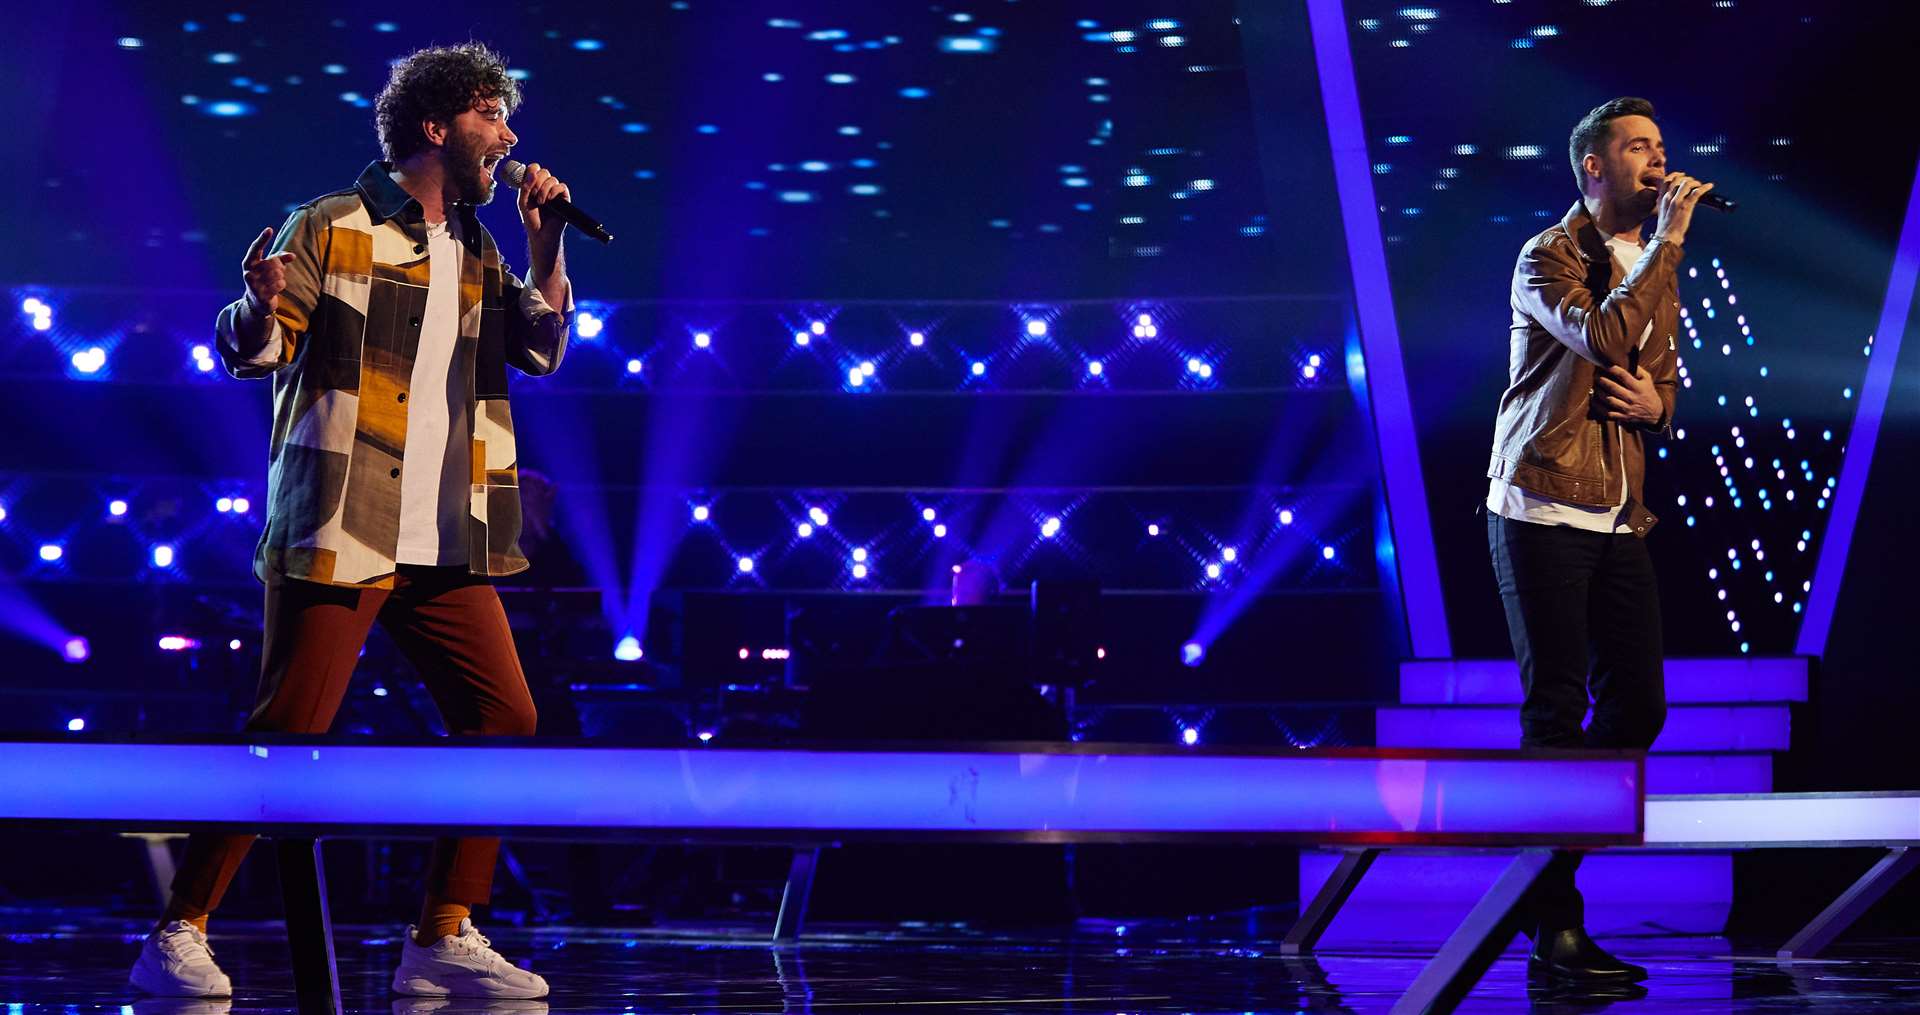 He performed against Matt Croke in the battle rounds. Picture: ITVs The Voice UK